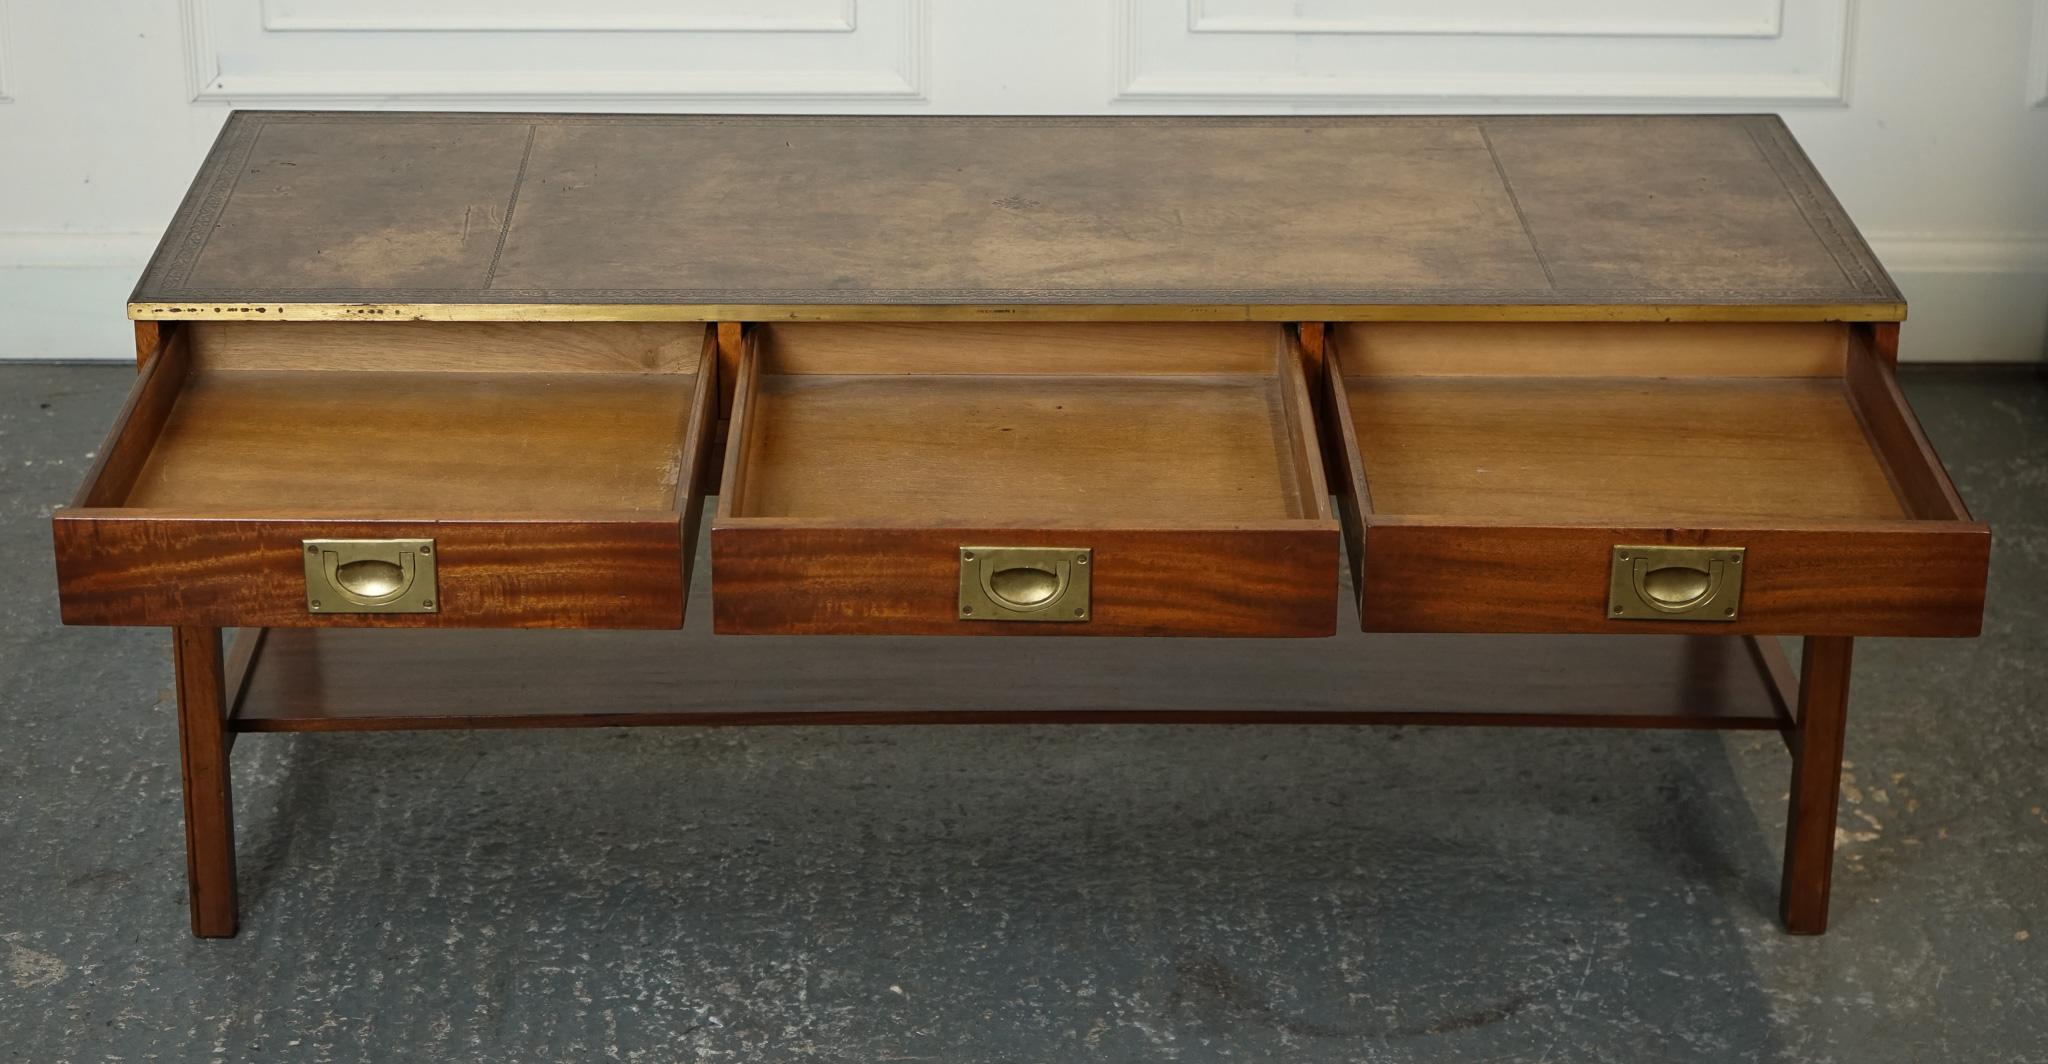 Hand-Crafted VINTAGE MILITARY CAMPAiGN STYLE COFFEE TABLE W/ BROWN AGED LEATHER 3 DRAWERS J1 For Sale